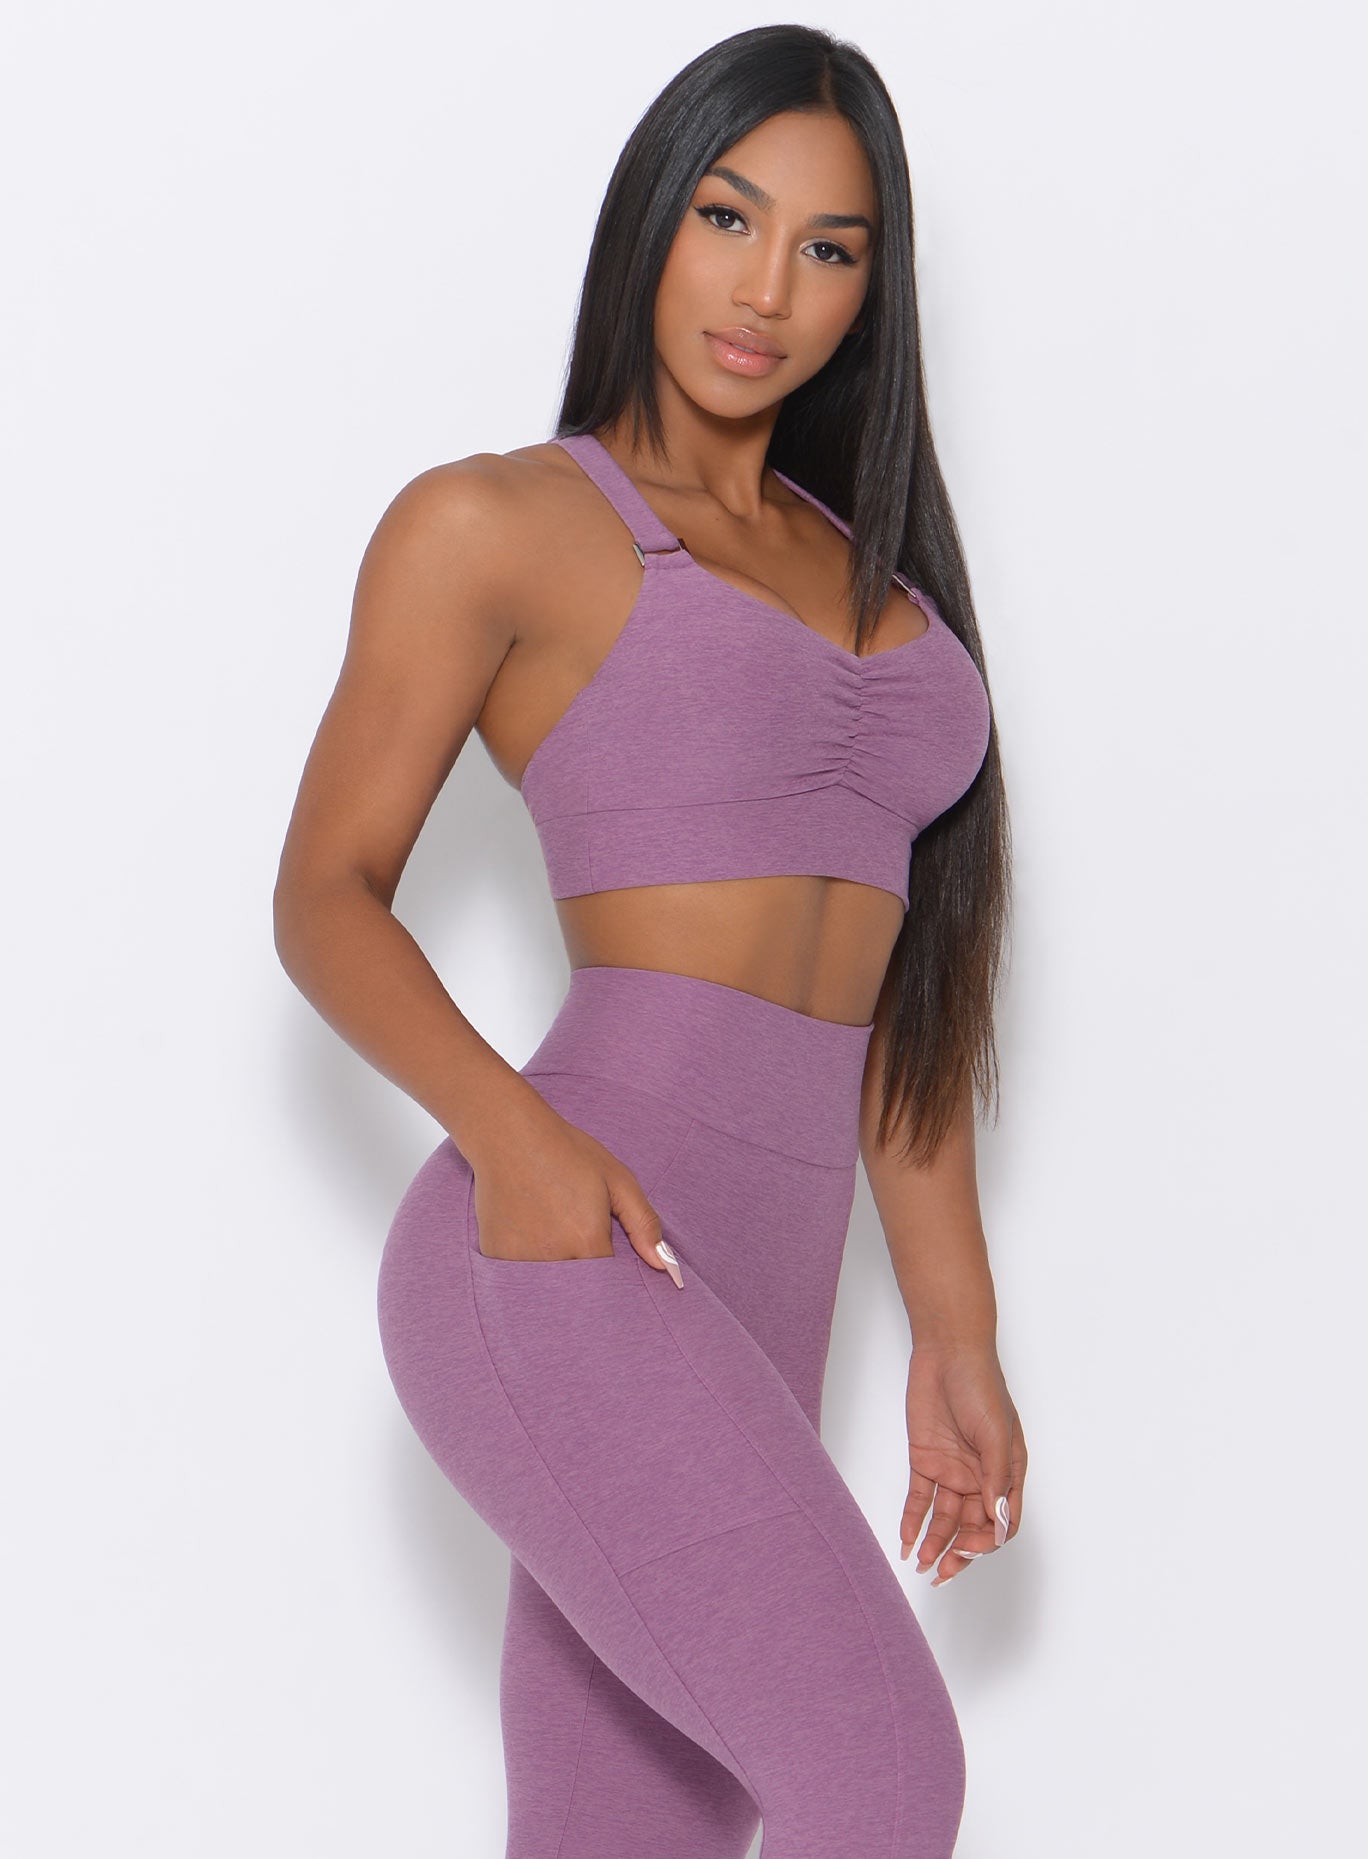 Right side view of the model wearing our perfection sports bra in lavender and a matching leggigs